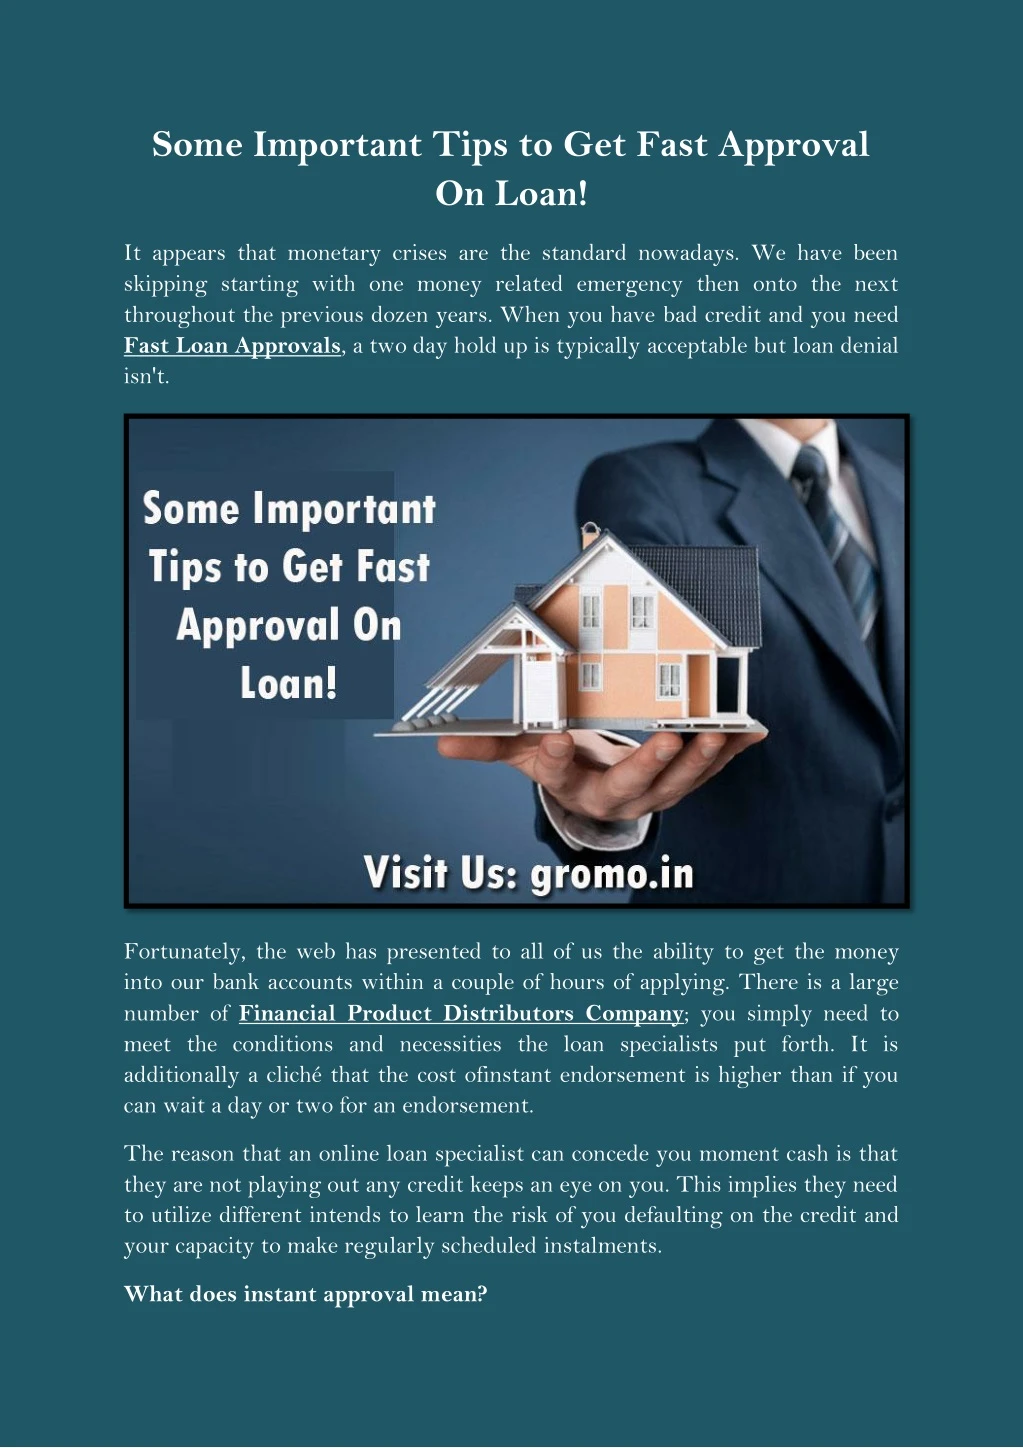 some important tips to get fast approval on loan